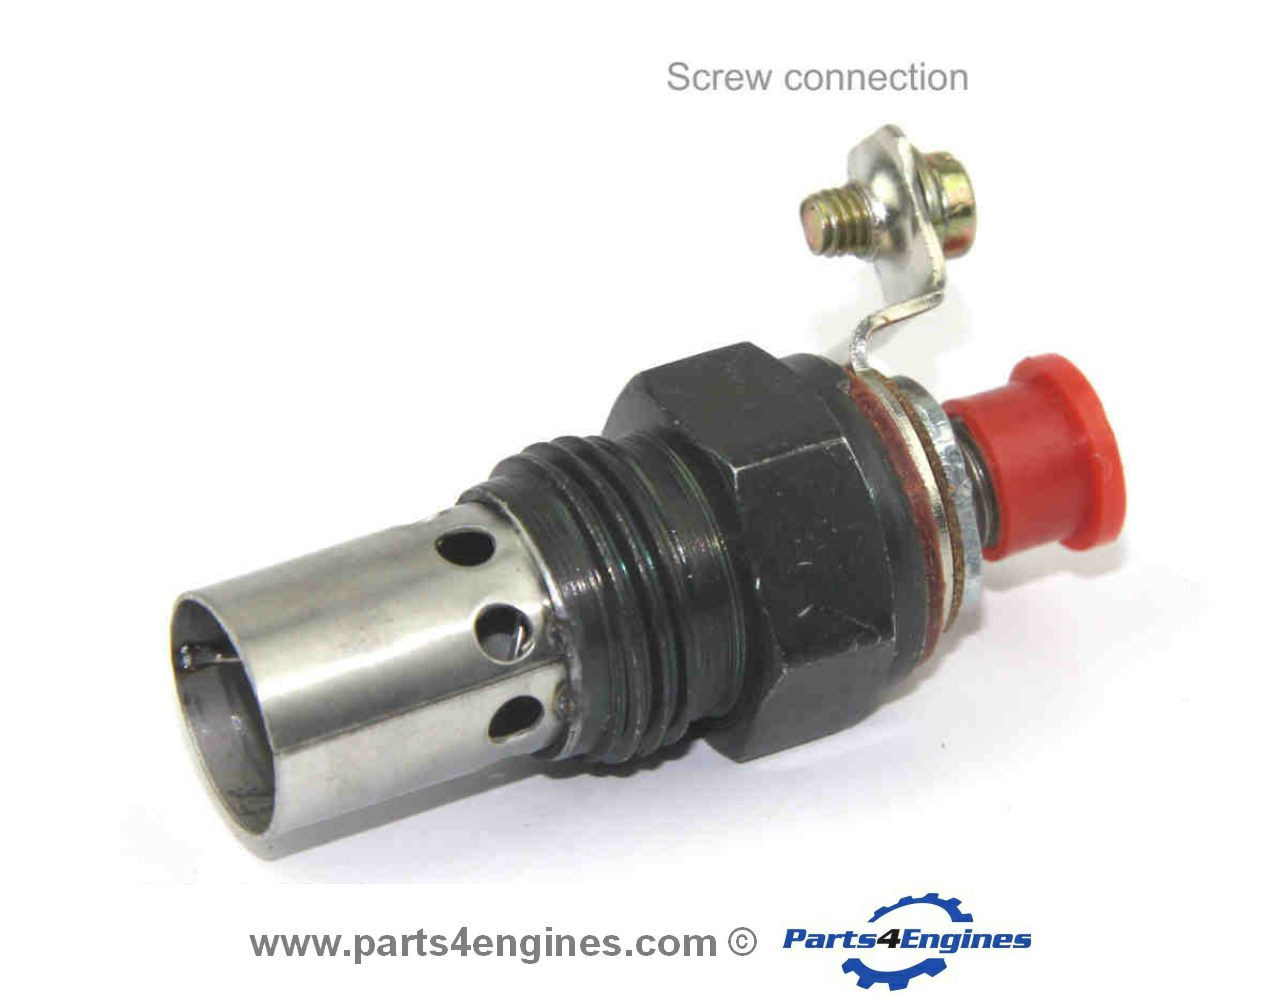 Screw connection: Perkins 4.108 Glowplug Thermostart from Parts4engines.com